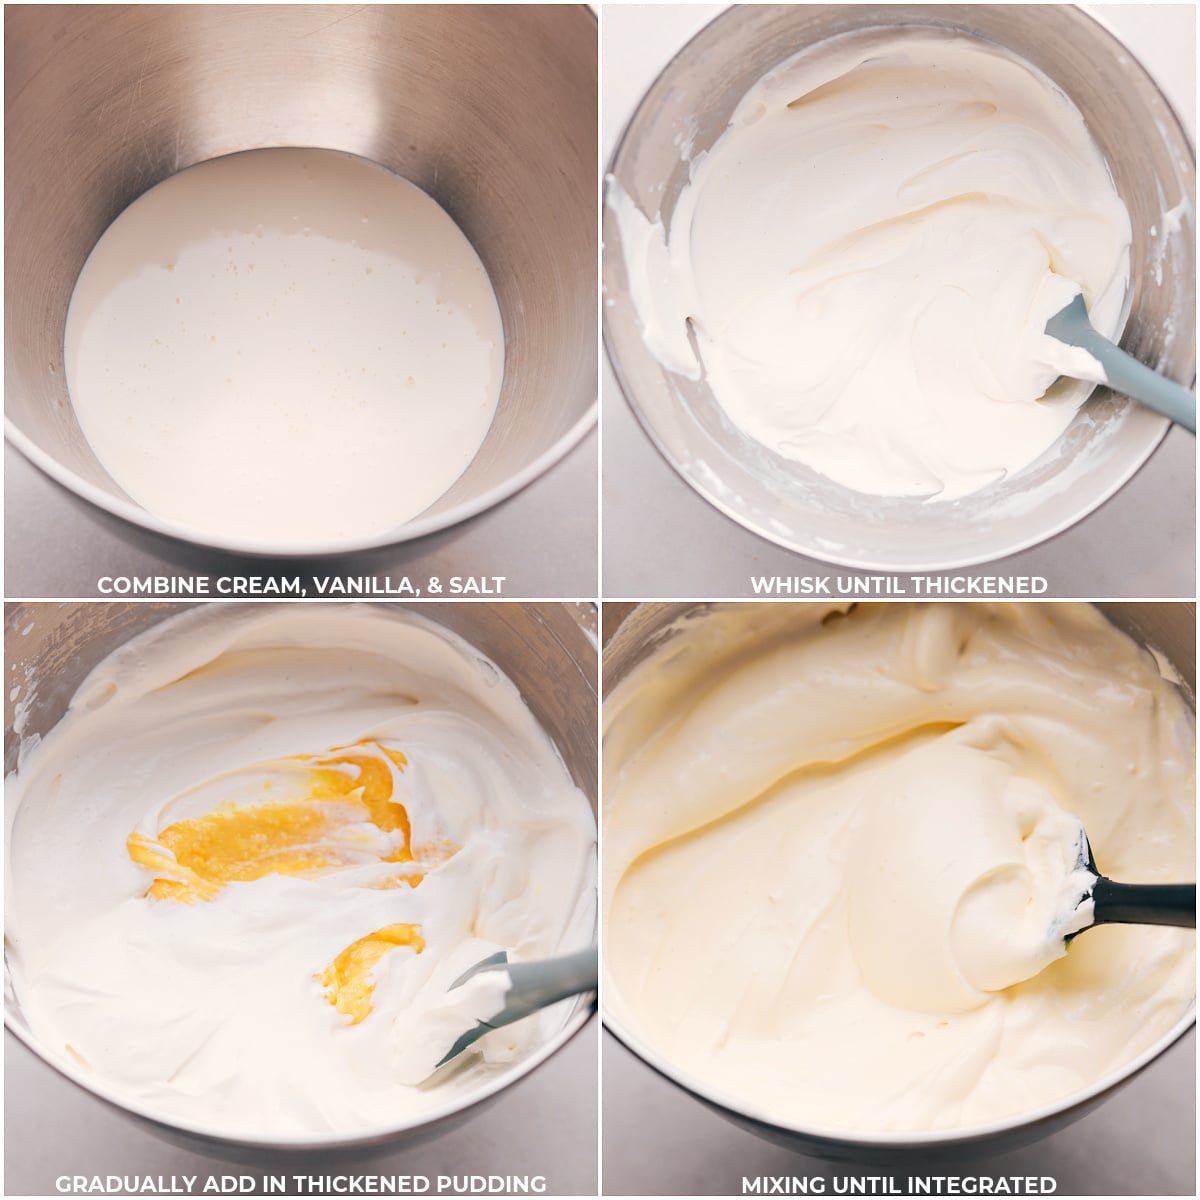 In a separate bowl, cream, vanilla, and salt being whisked until thickened, followed by gradually adding the thickened pudding and mixing until fully integrated, creating a creamy base for this dessert.